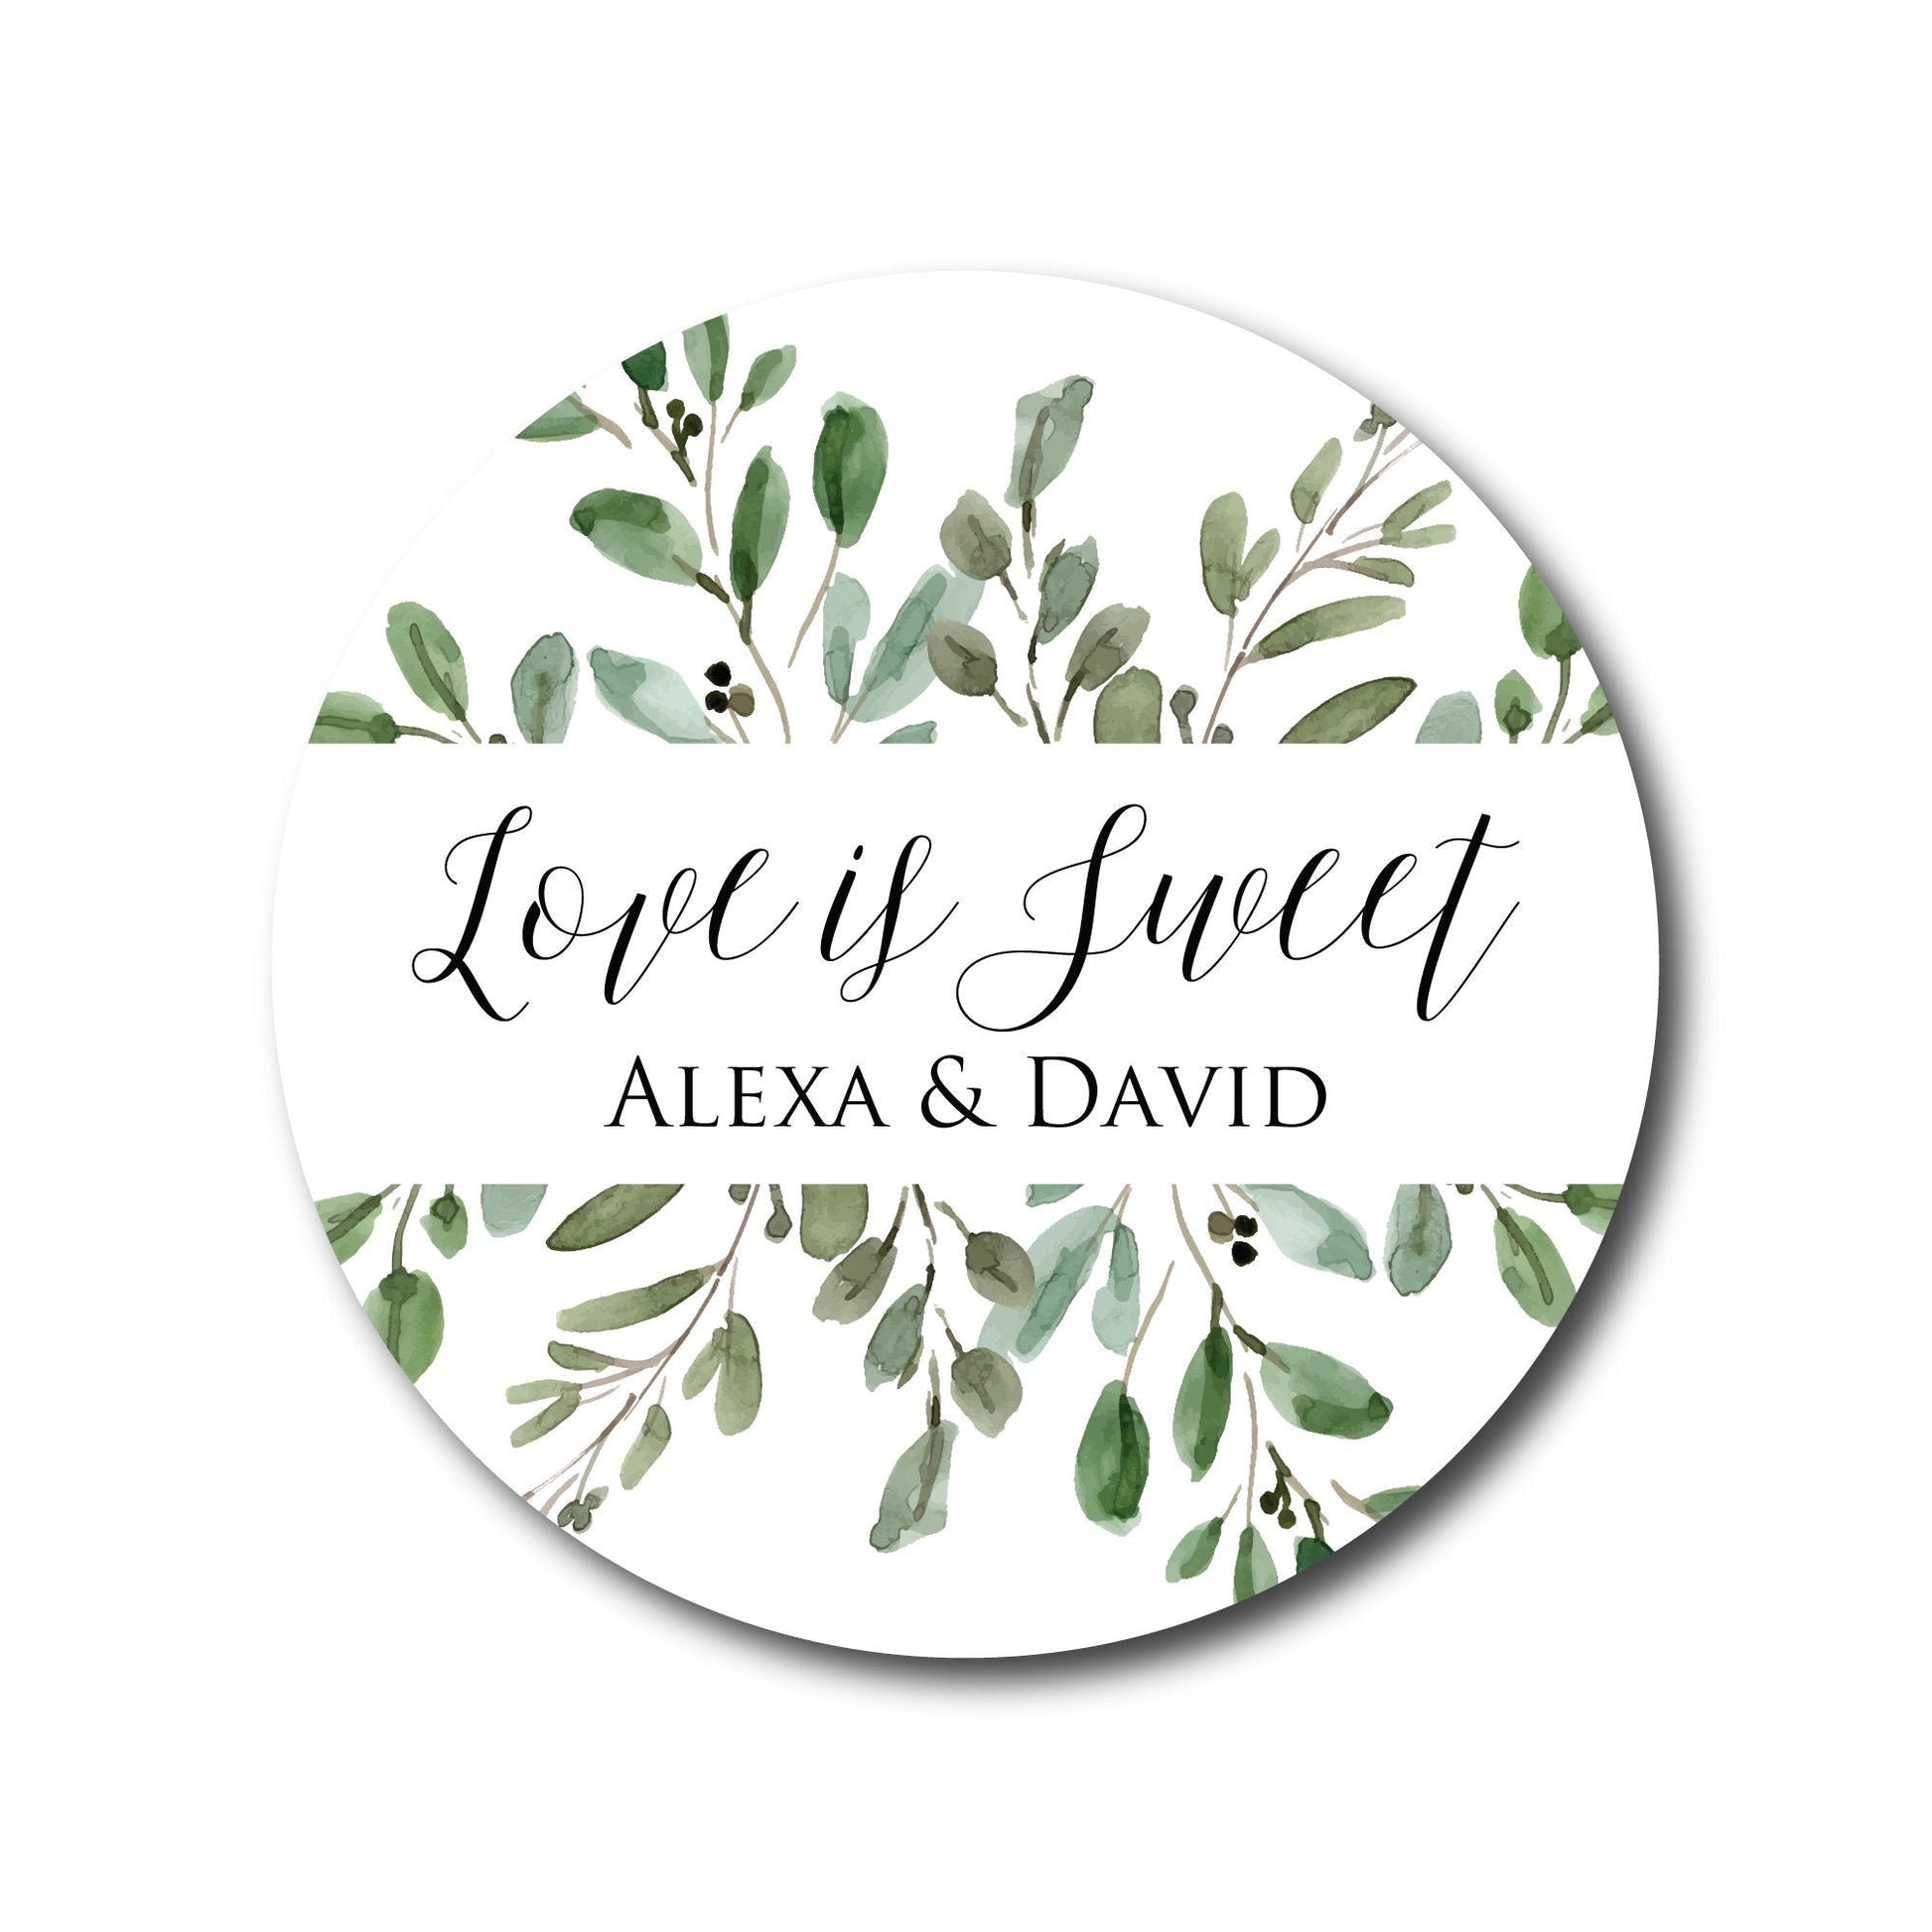 Love is Sweet Wedding Stickers for Favors Wedding Favor Stickers Thank You Stickers Greenery Botanical Wedding Favor Tags Olive Leaves